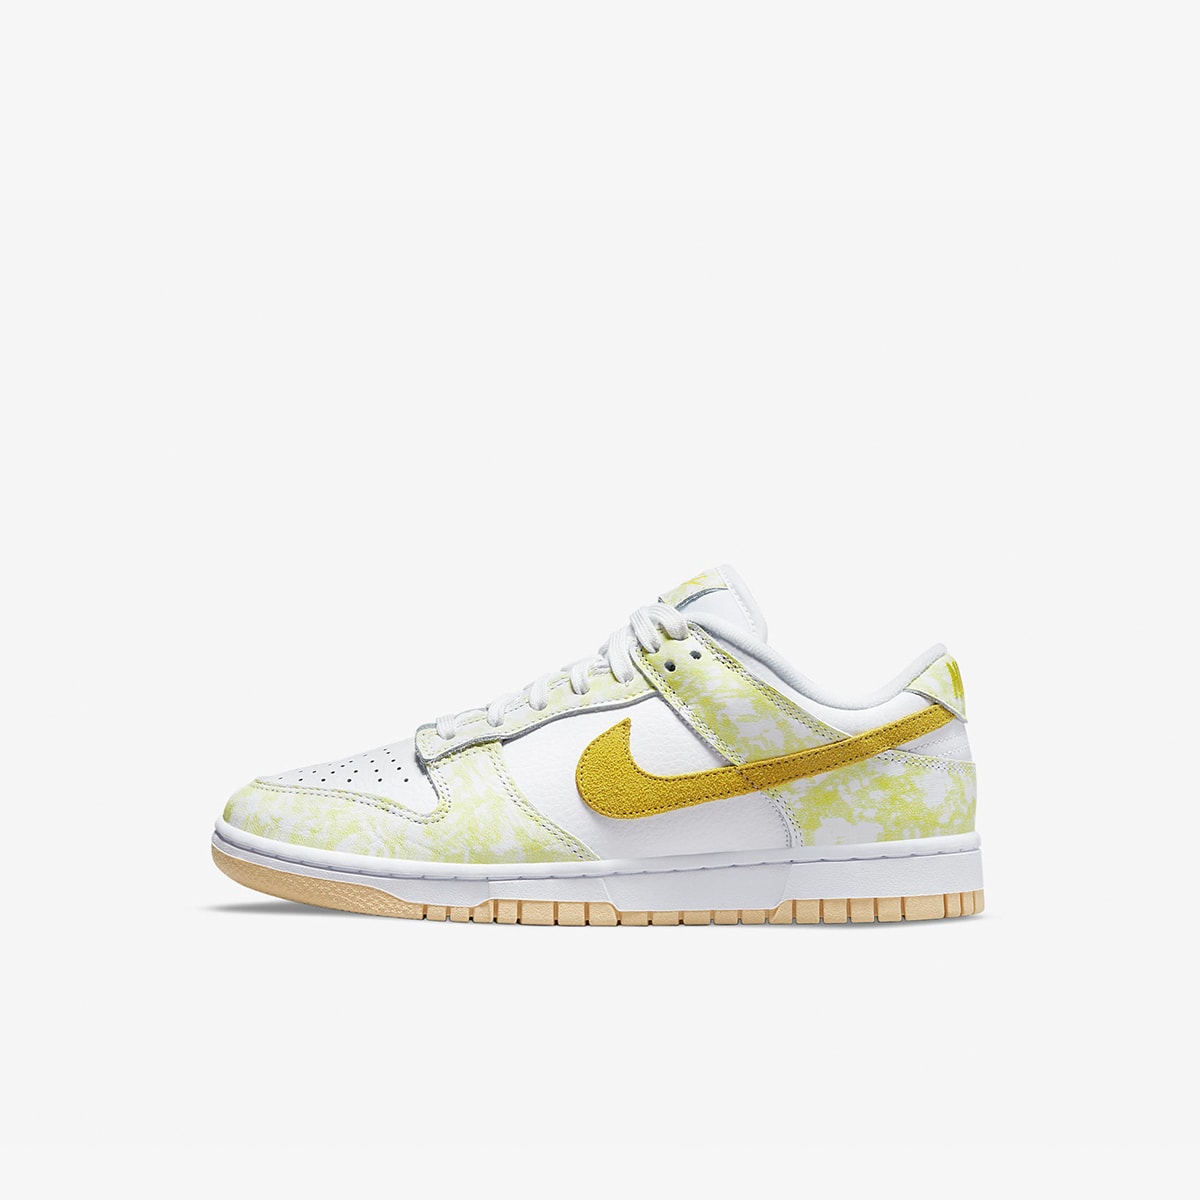 Nike Dunk Low OG W (Yellow Strike) | END. Launches